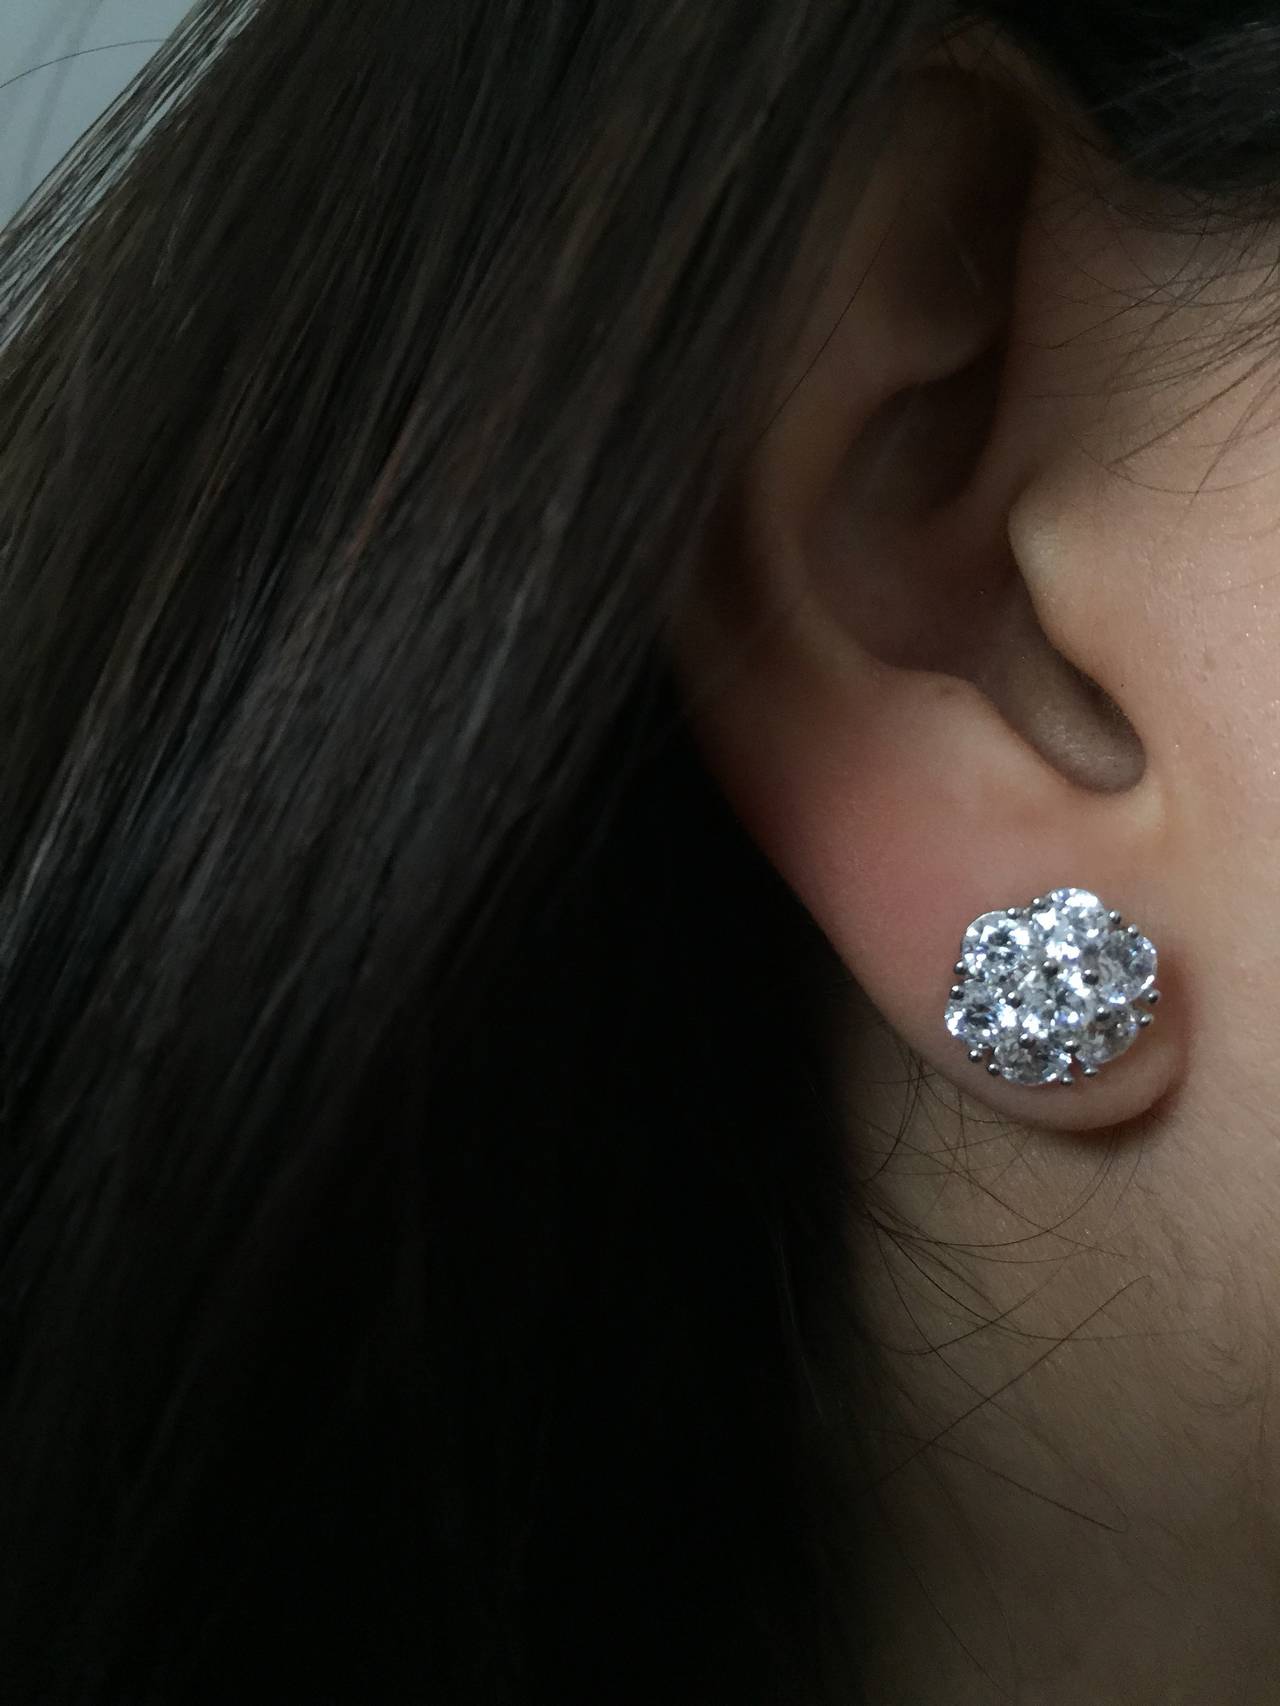 Colorless/VVS Clarity Diamonds. 
These cluster diamond earrings were designed and manufactured by Emilio!